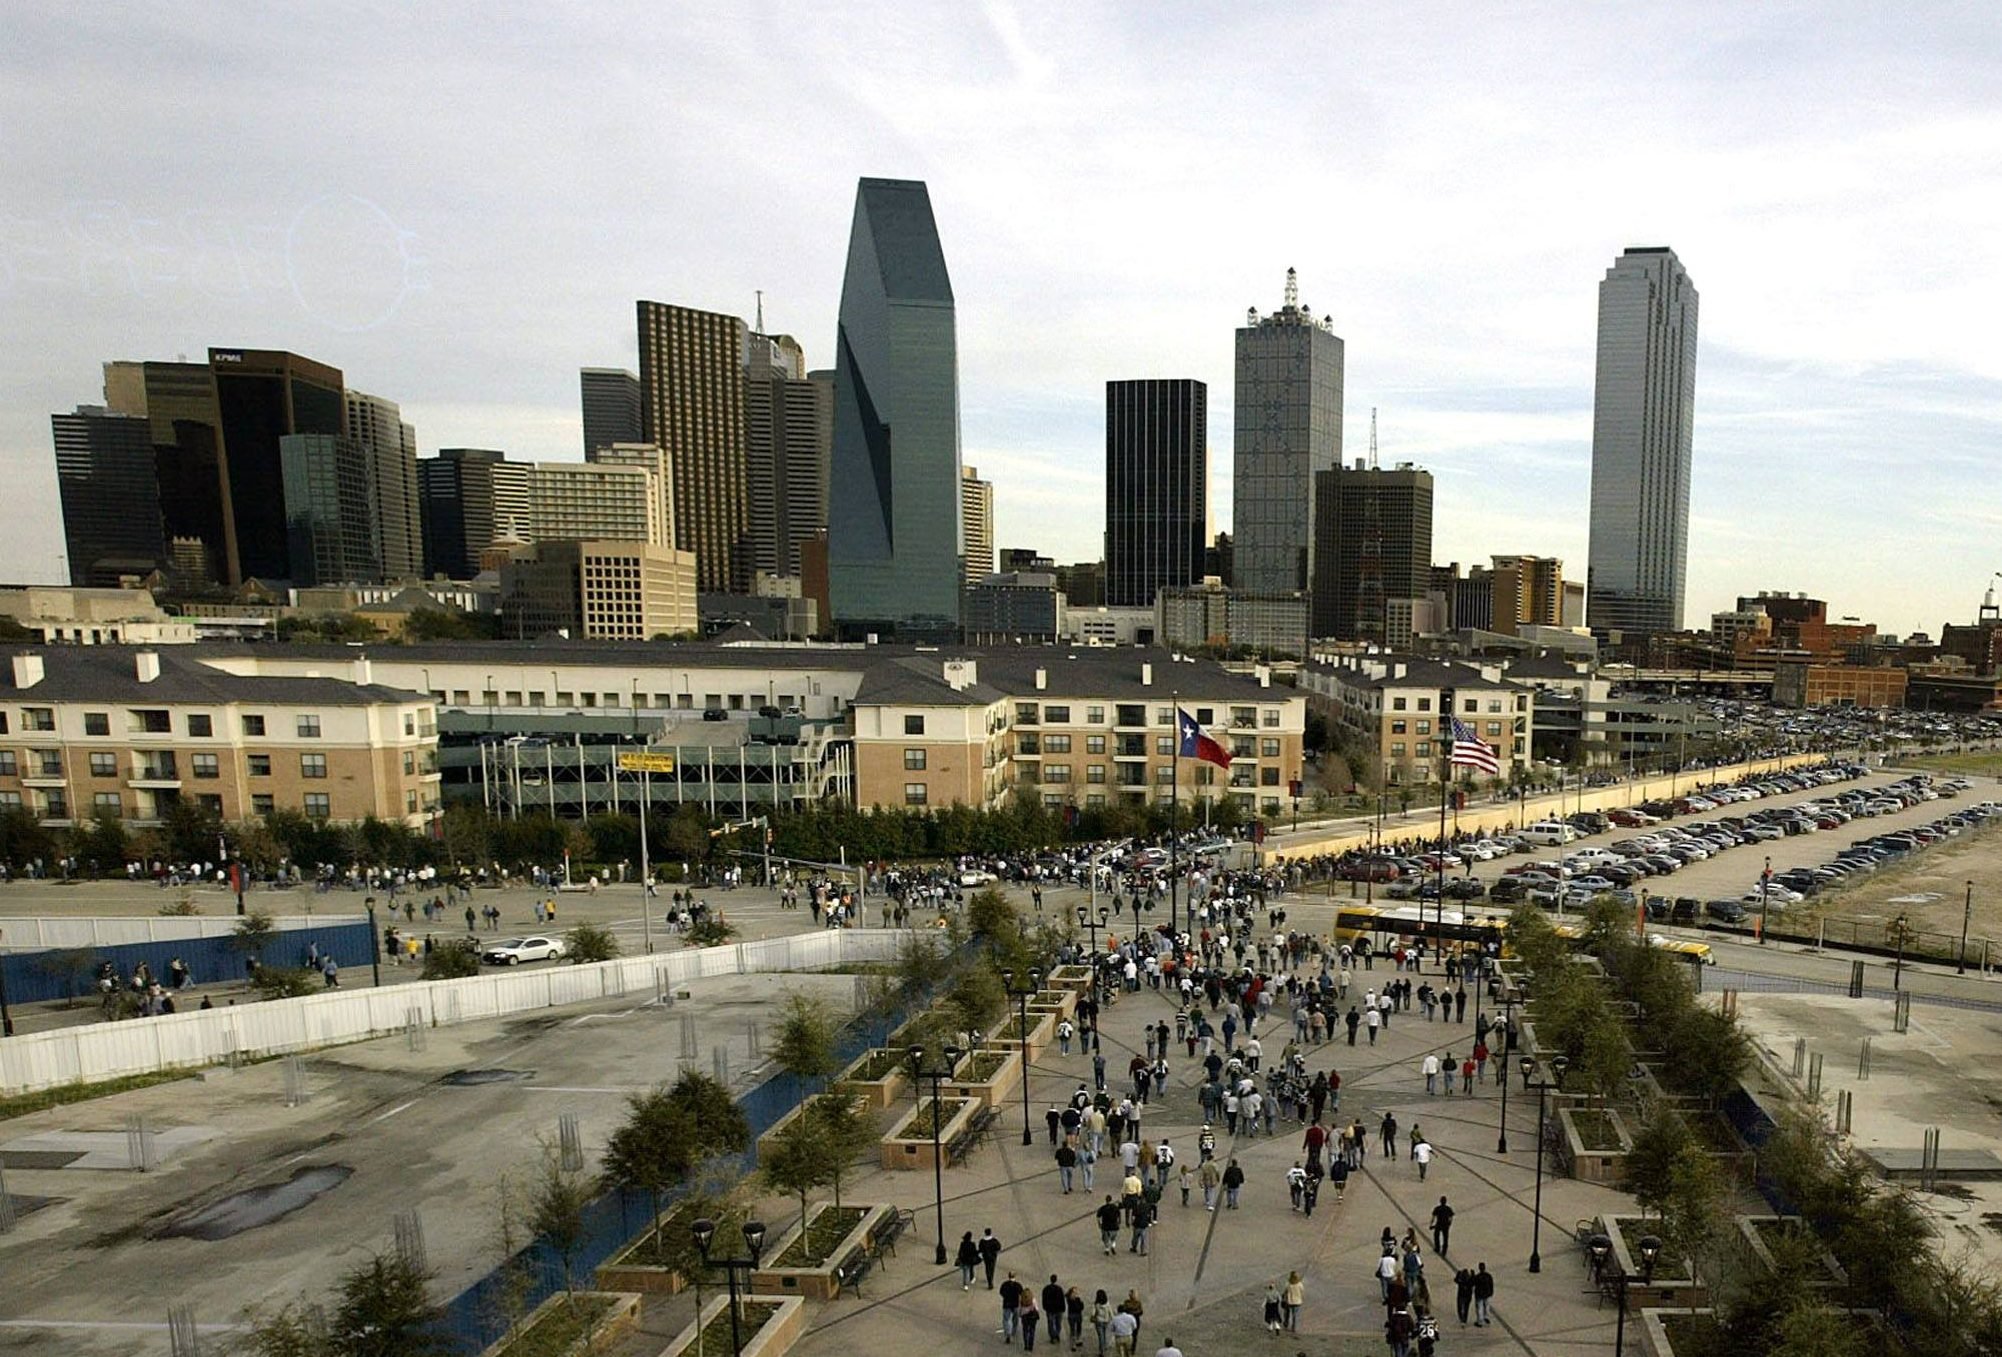 A general view of the Dallas skyline